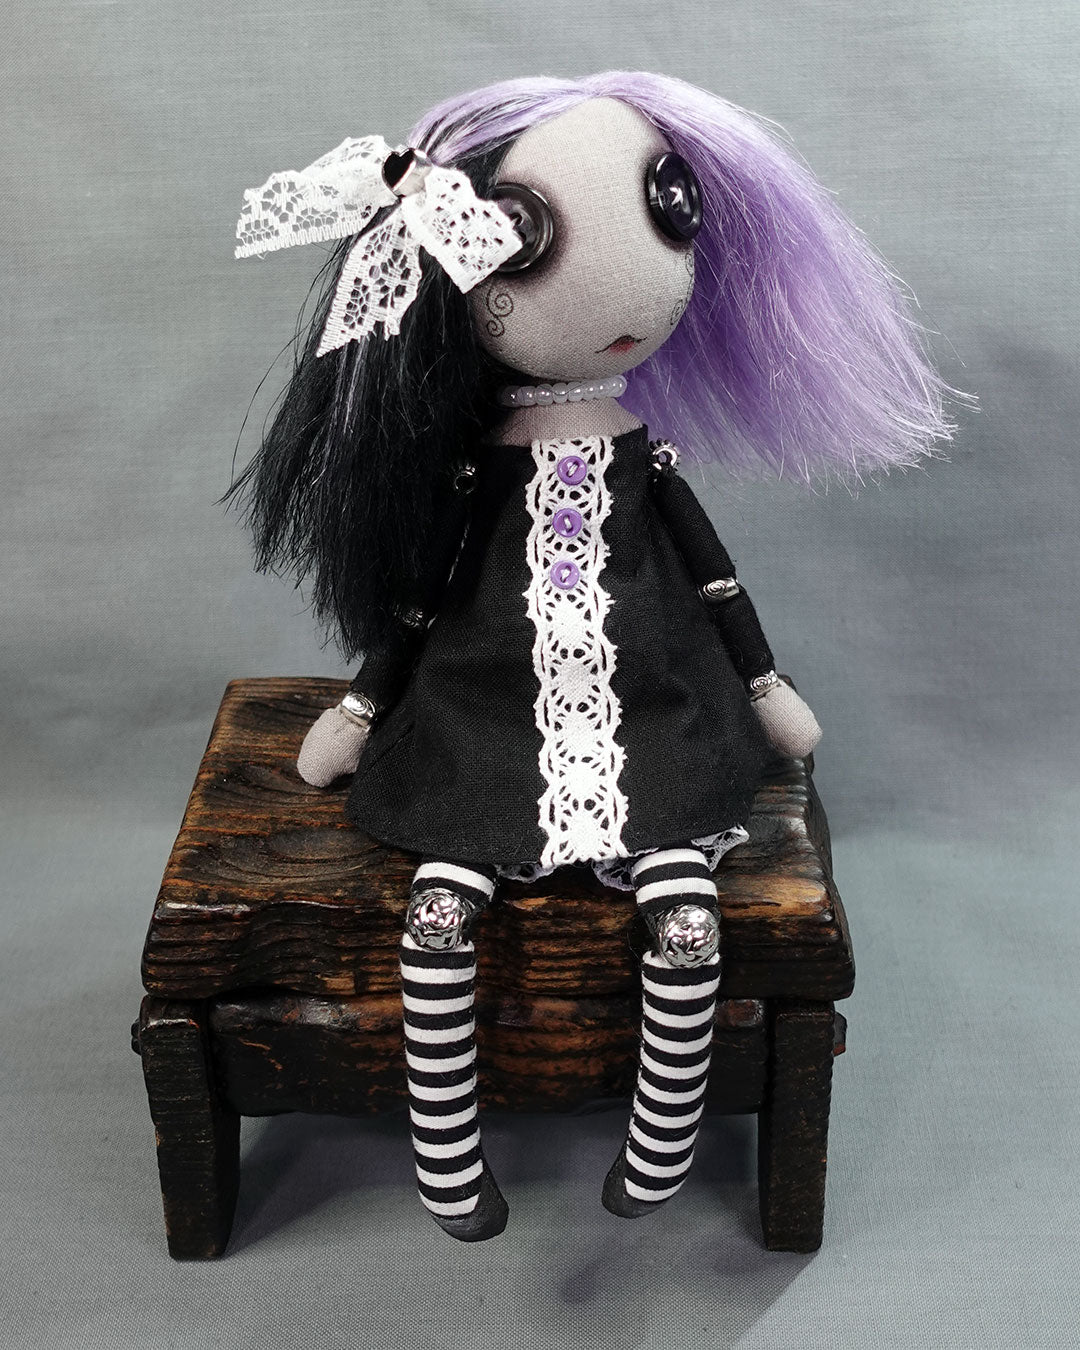 a button eyed goth doll in black and white dress with purple and black hair and white lace hair bow